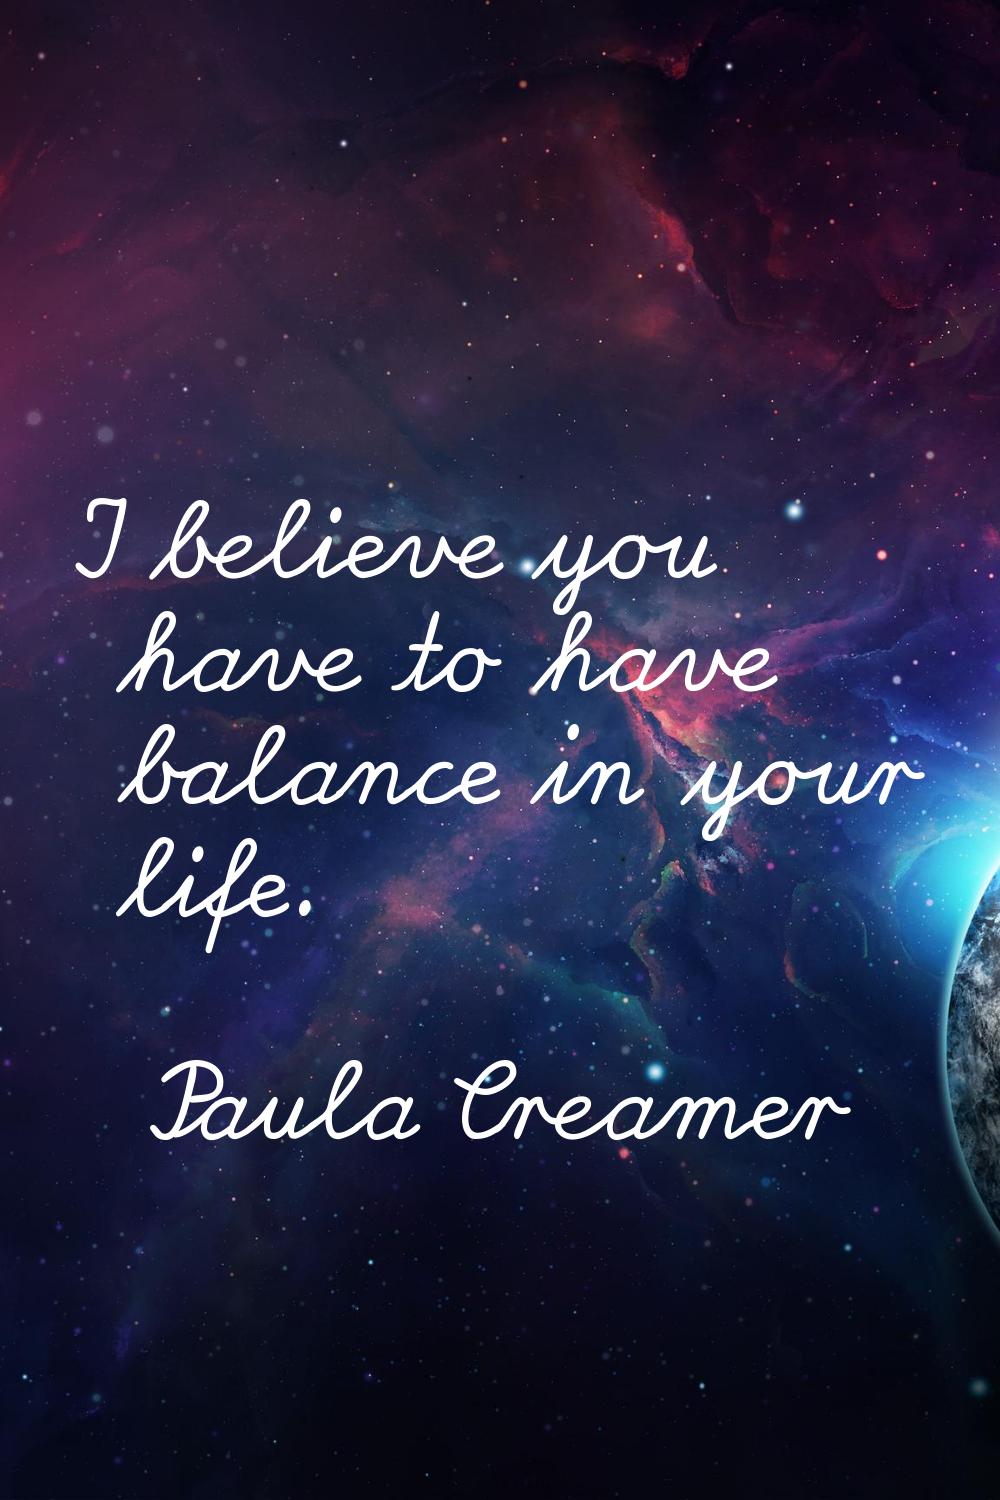 I believe you have to have balance in your life.